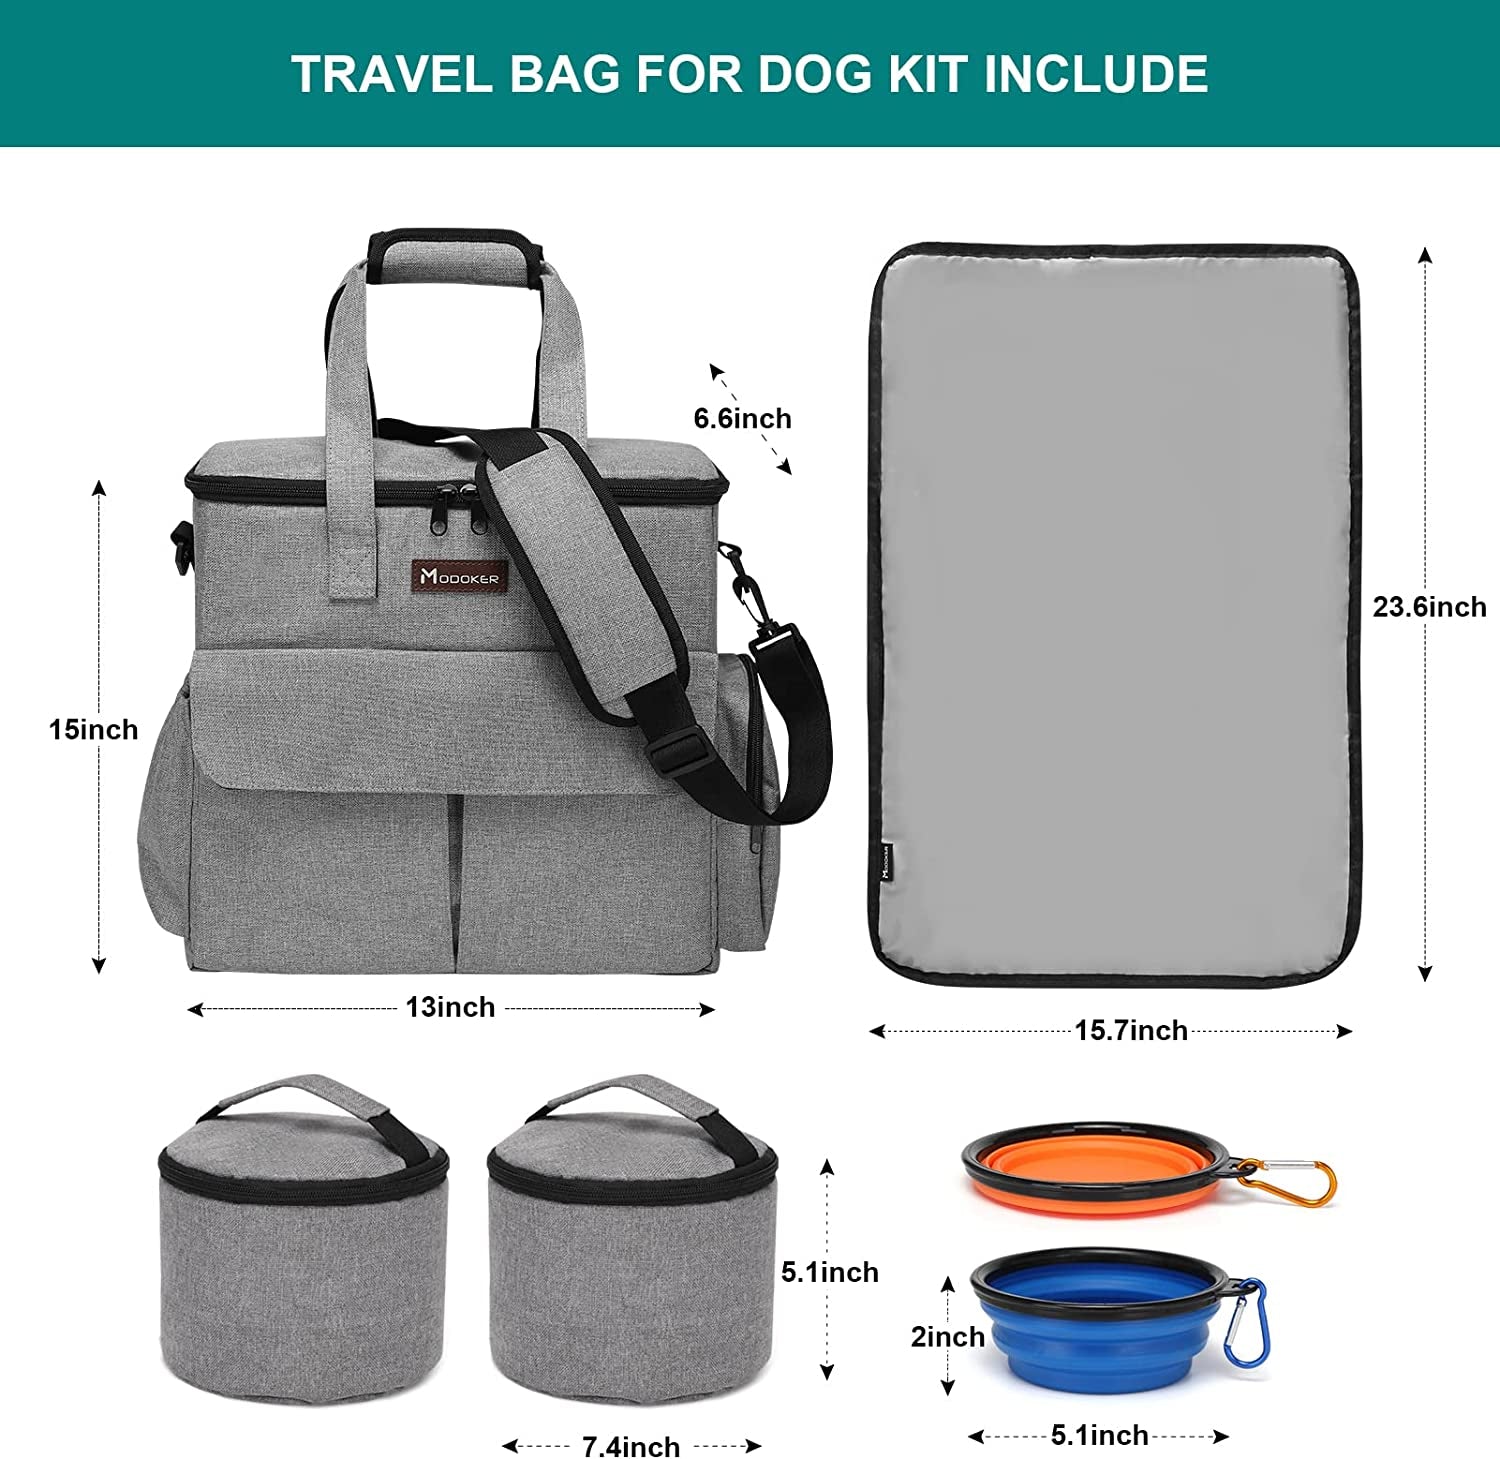 Dog Travel Bag, Weekend Pet Travel Set for Dog and Cat, Airline Approved Tote Organizer with Multi-Function Pockets, 2 Food Storage Containers, 2 Collapsible Bowls, 1 Feeding Mat (Grey)